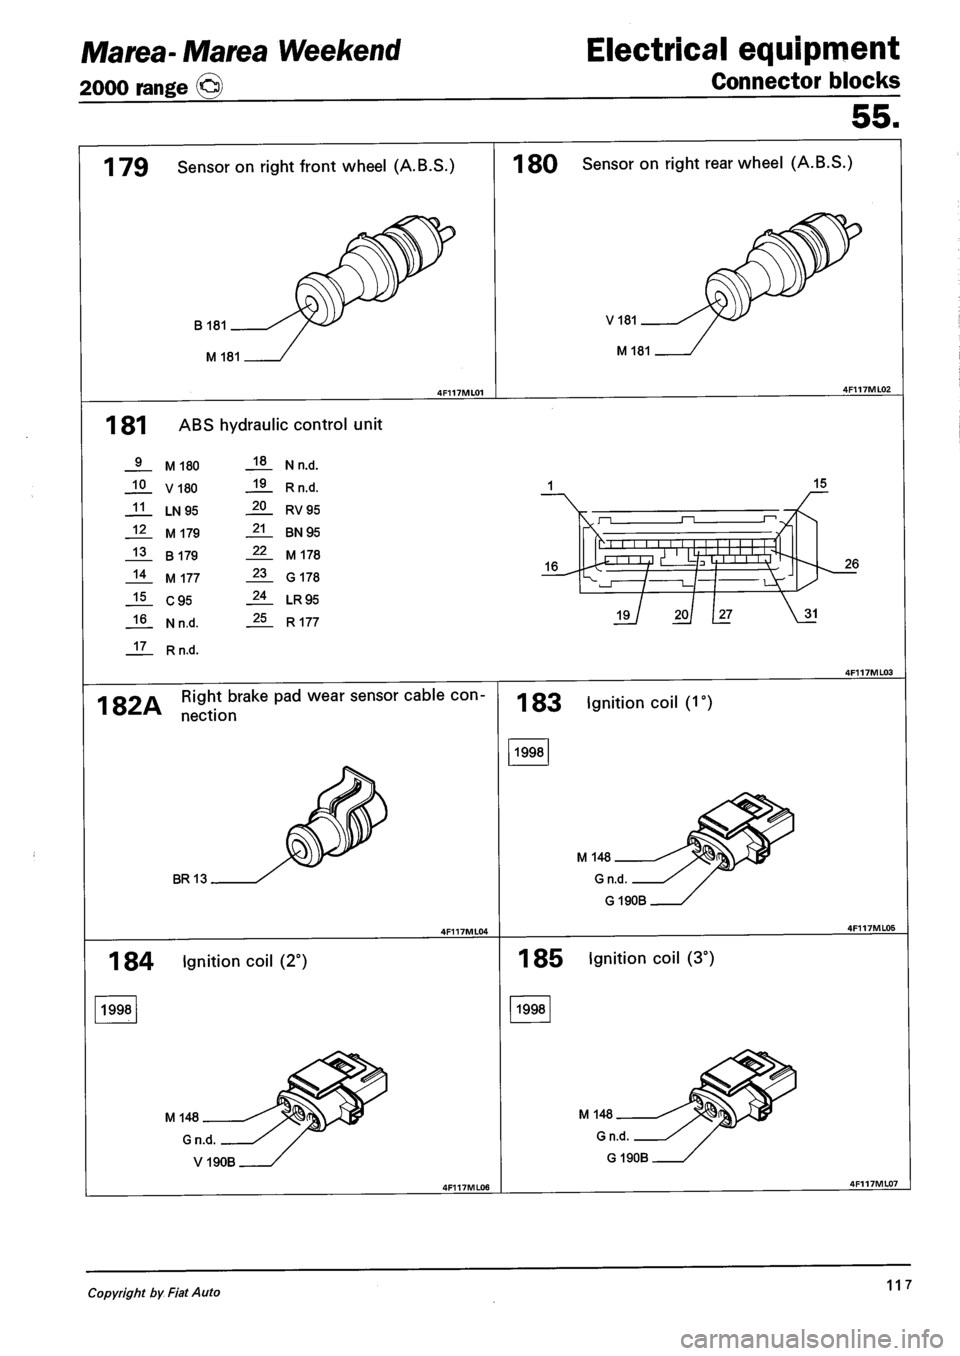 FIAT MAREA 2000 1.G Owners Manual Marea- Marea Weekend 
2000 range © 
Electrical equipment 
Connector blocks 
1 79 Sensor on right front wheel (A.B.S.) 
B 181 
M 181 
1 81 ABS hydraulic control unit 
10 
11 
12  
13  
14  
15  
16 
1